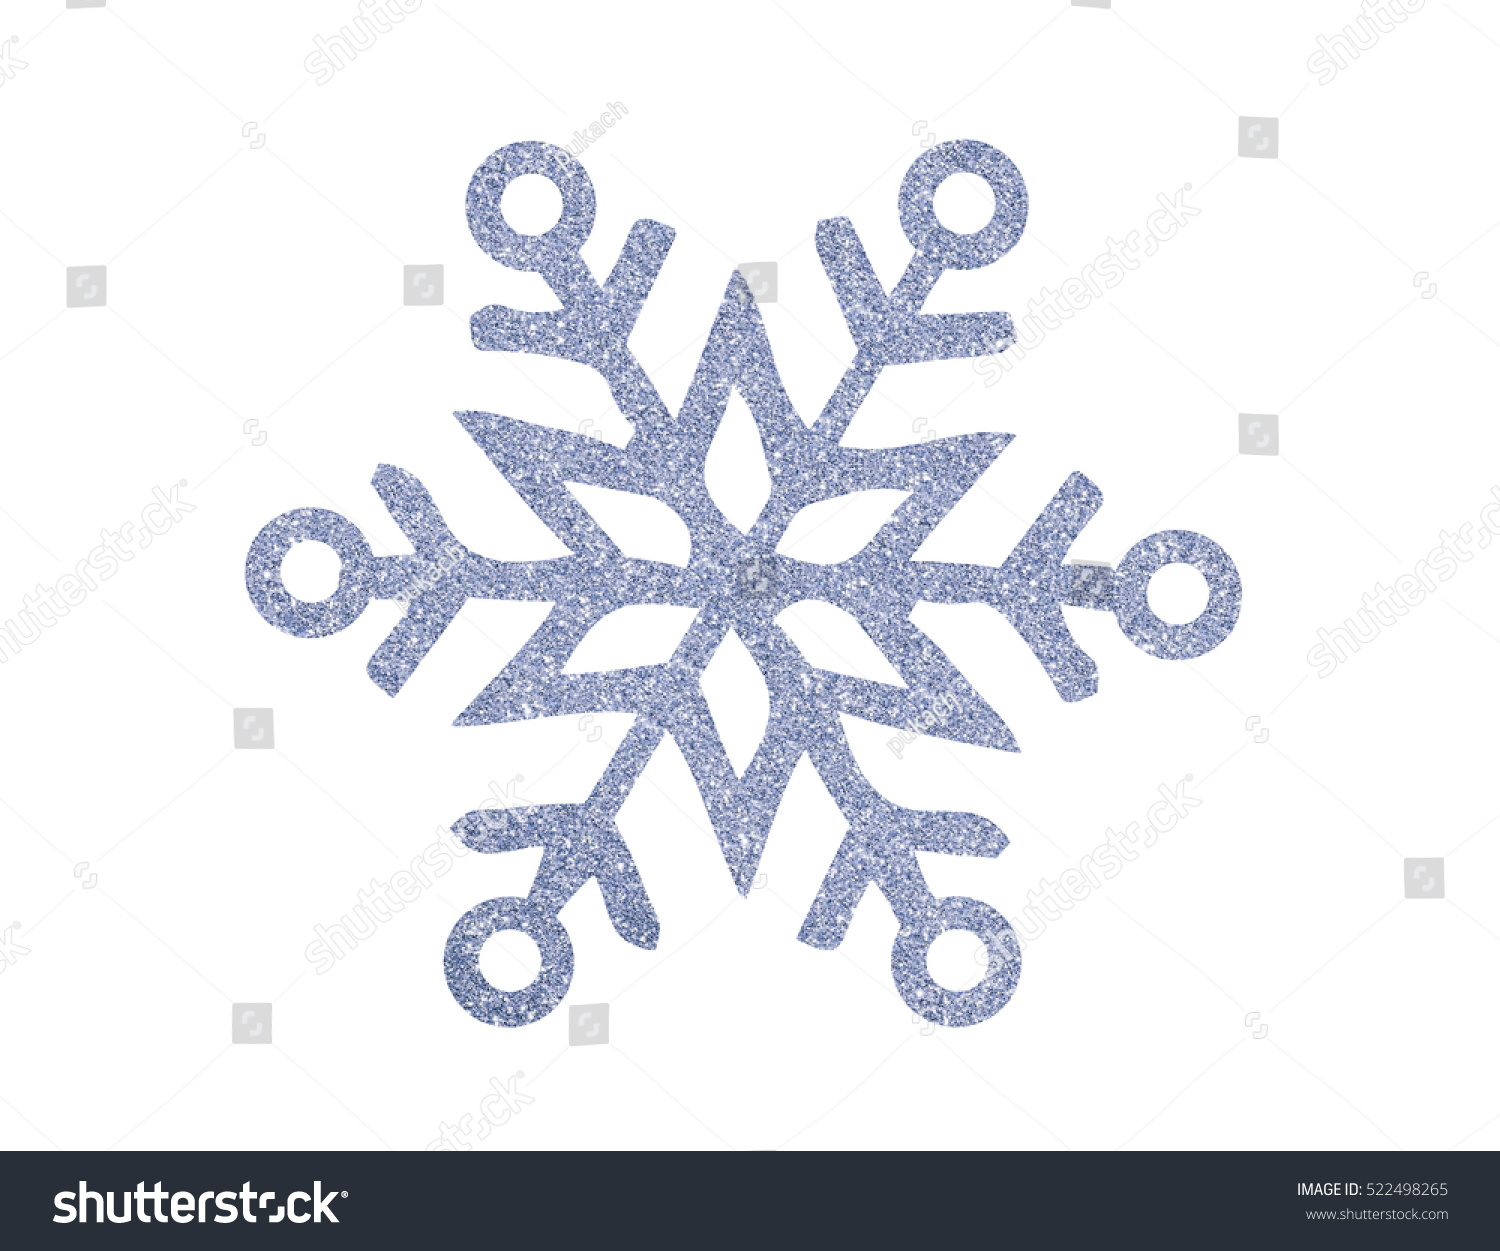 Silver Christmas snowflake isolated on white background #522498265